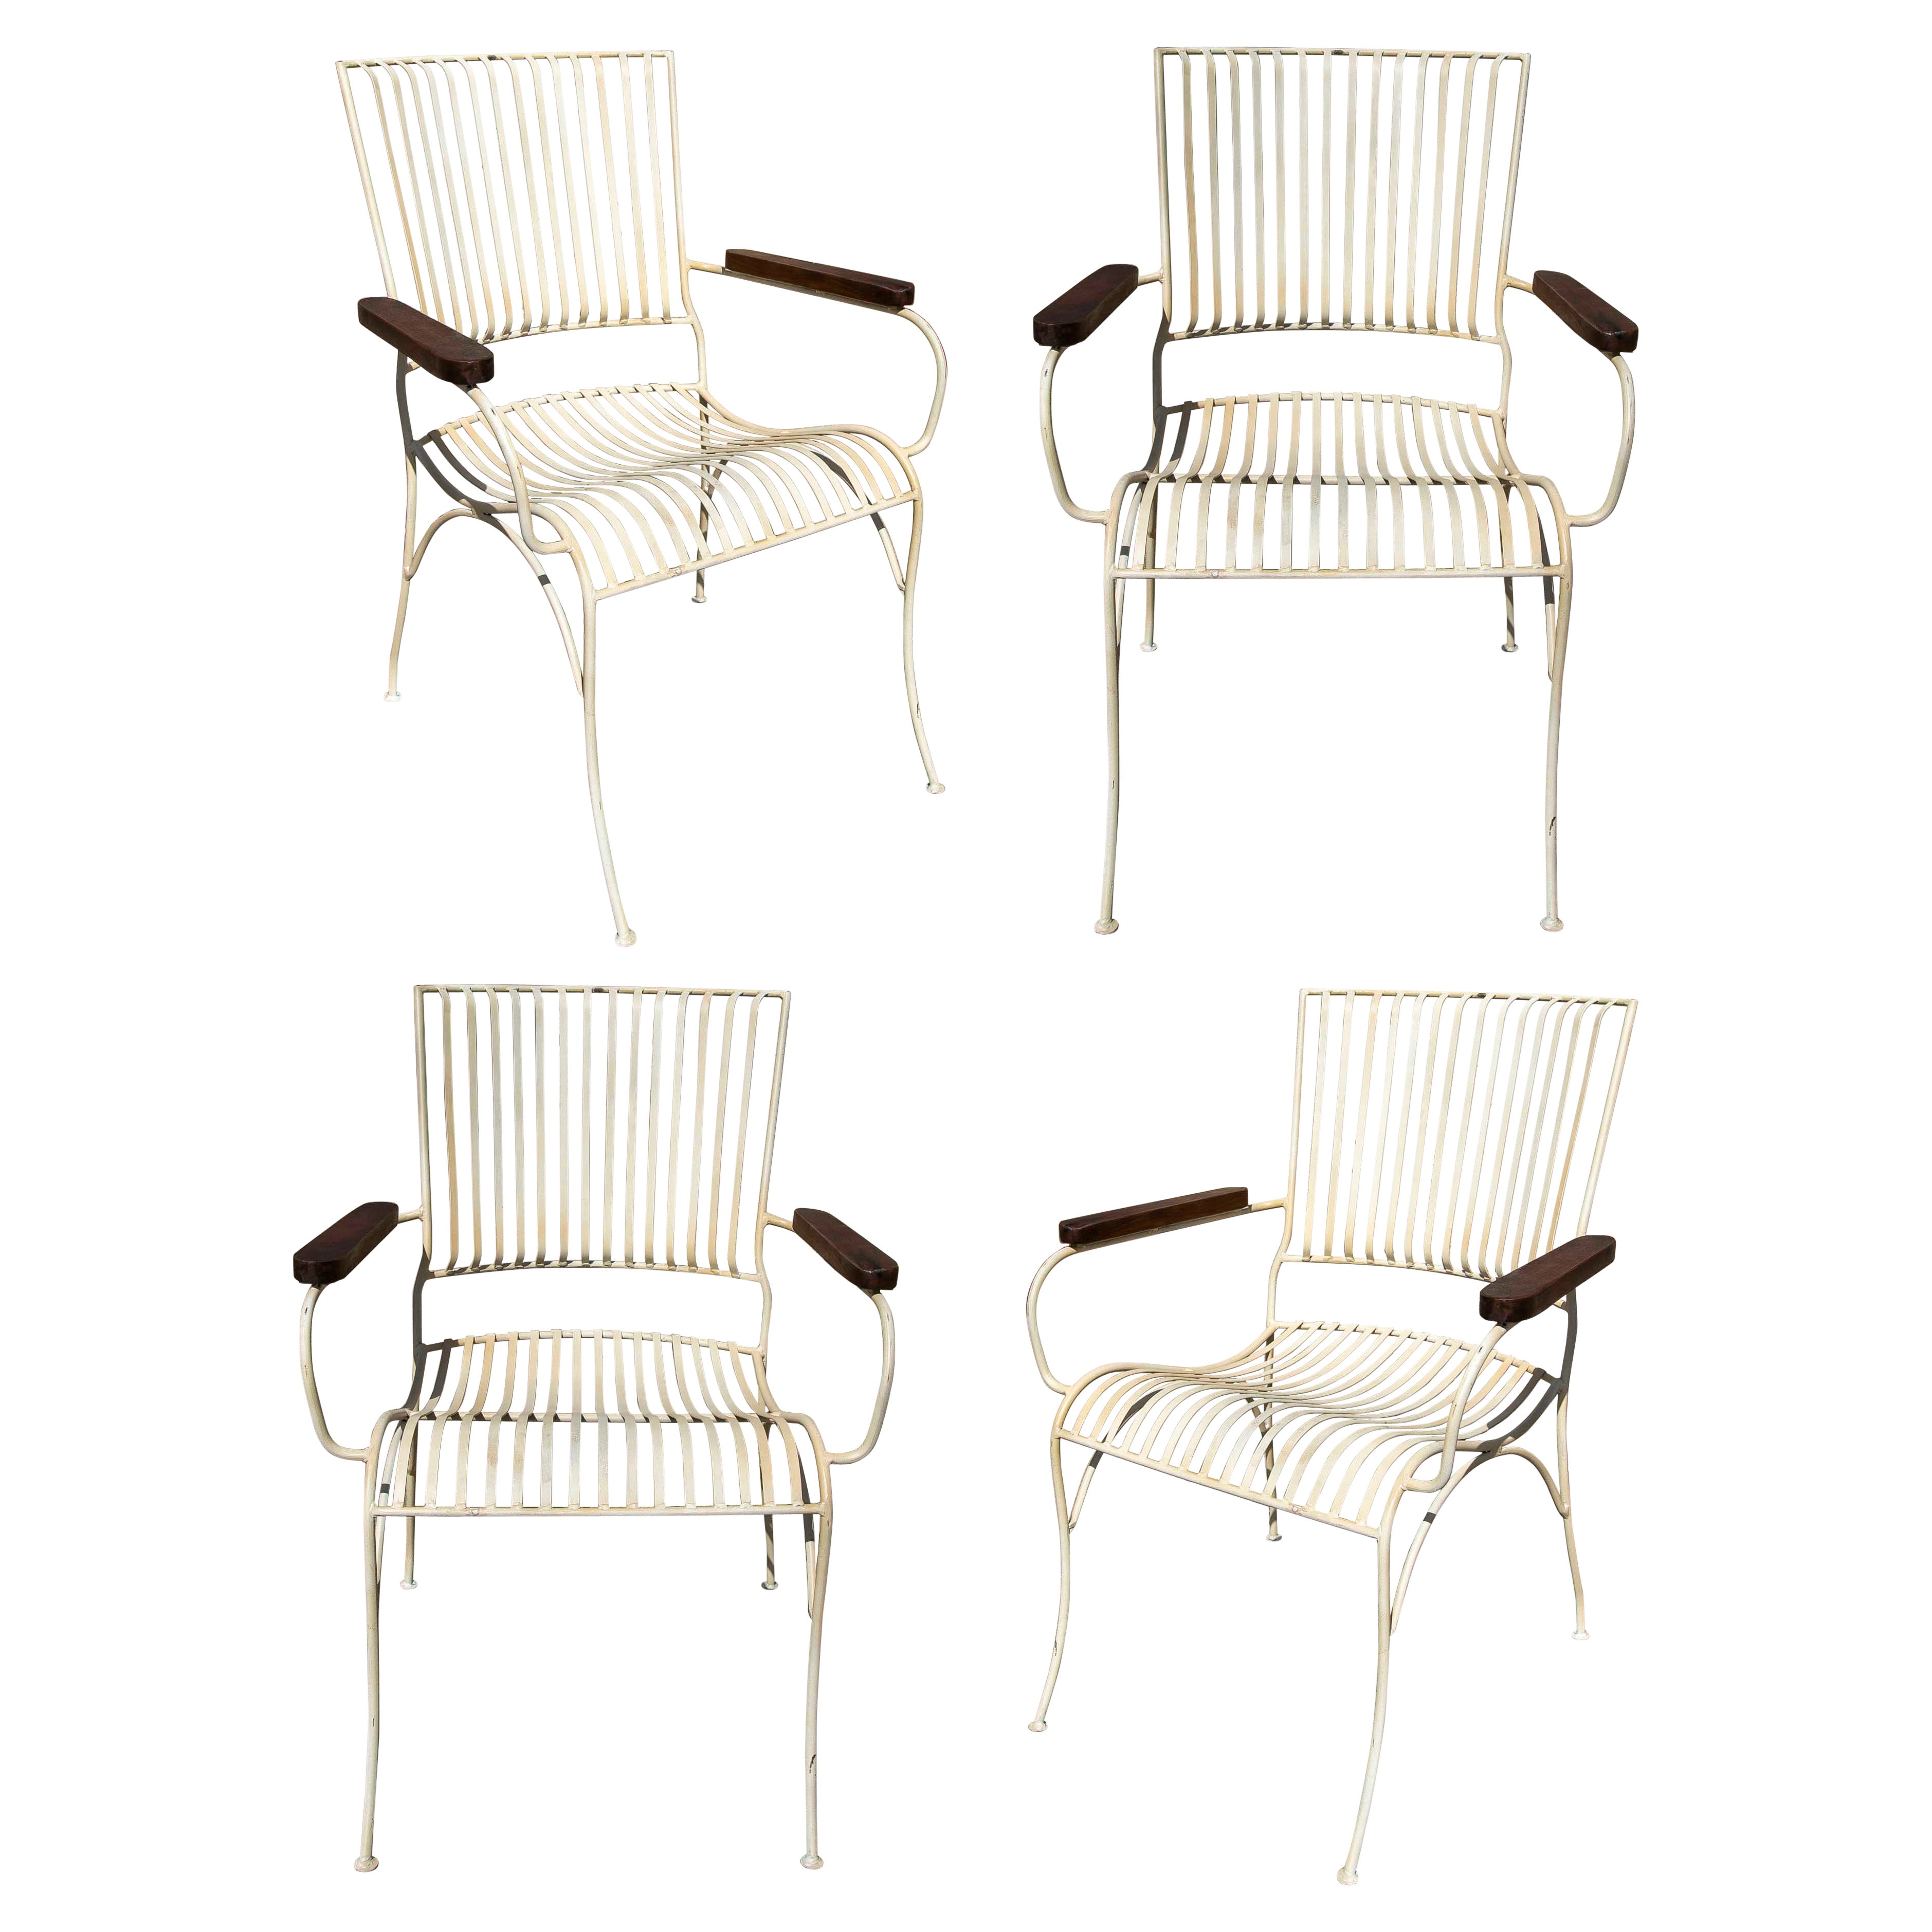 Set of Four Garden Chairs Made of Iron with Wooden Armrests 